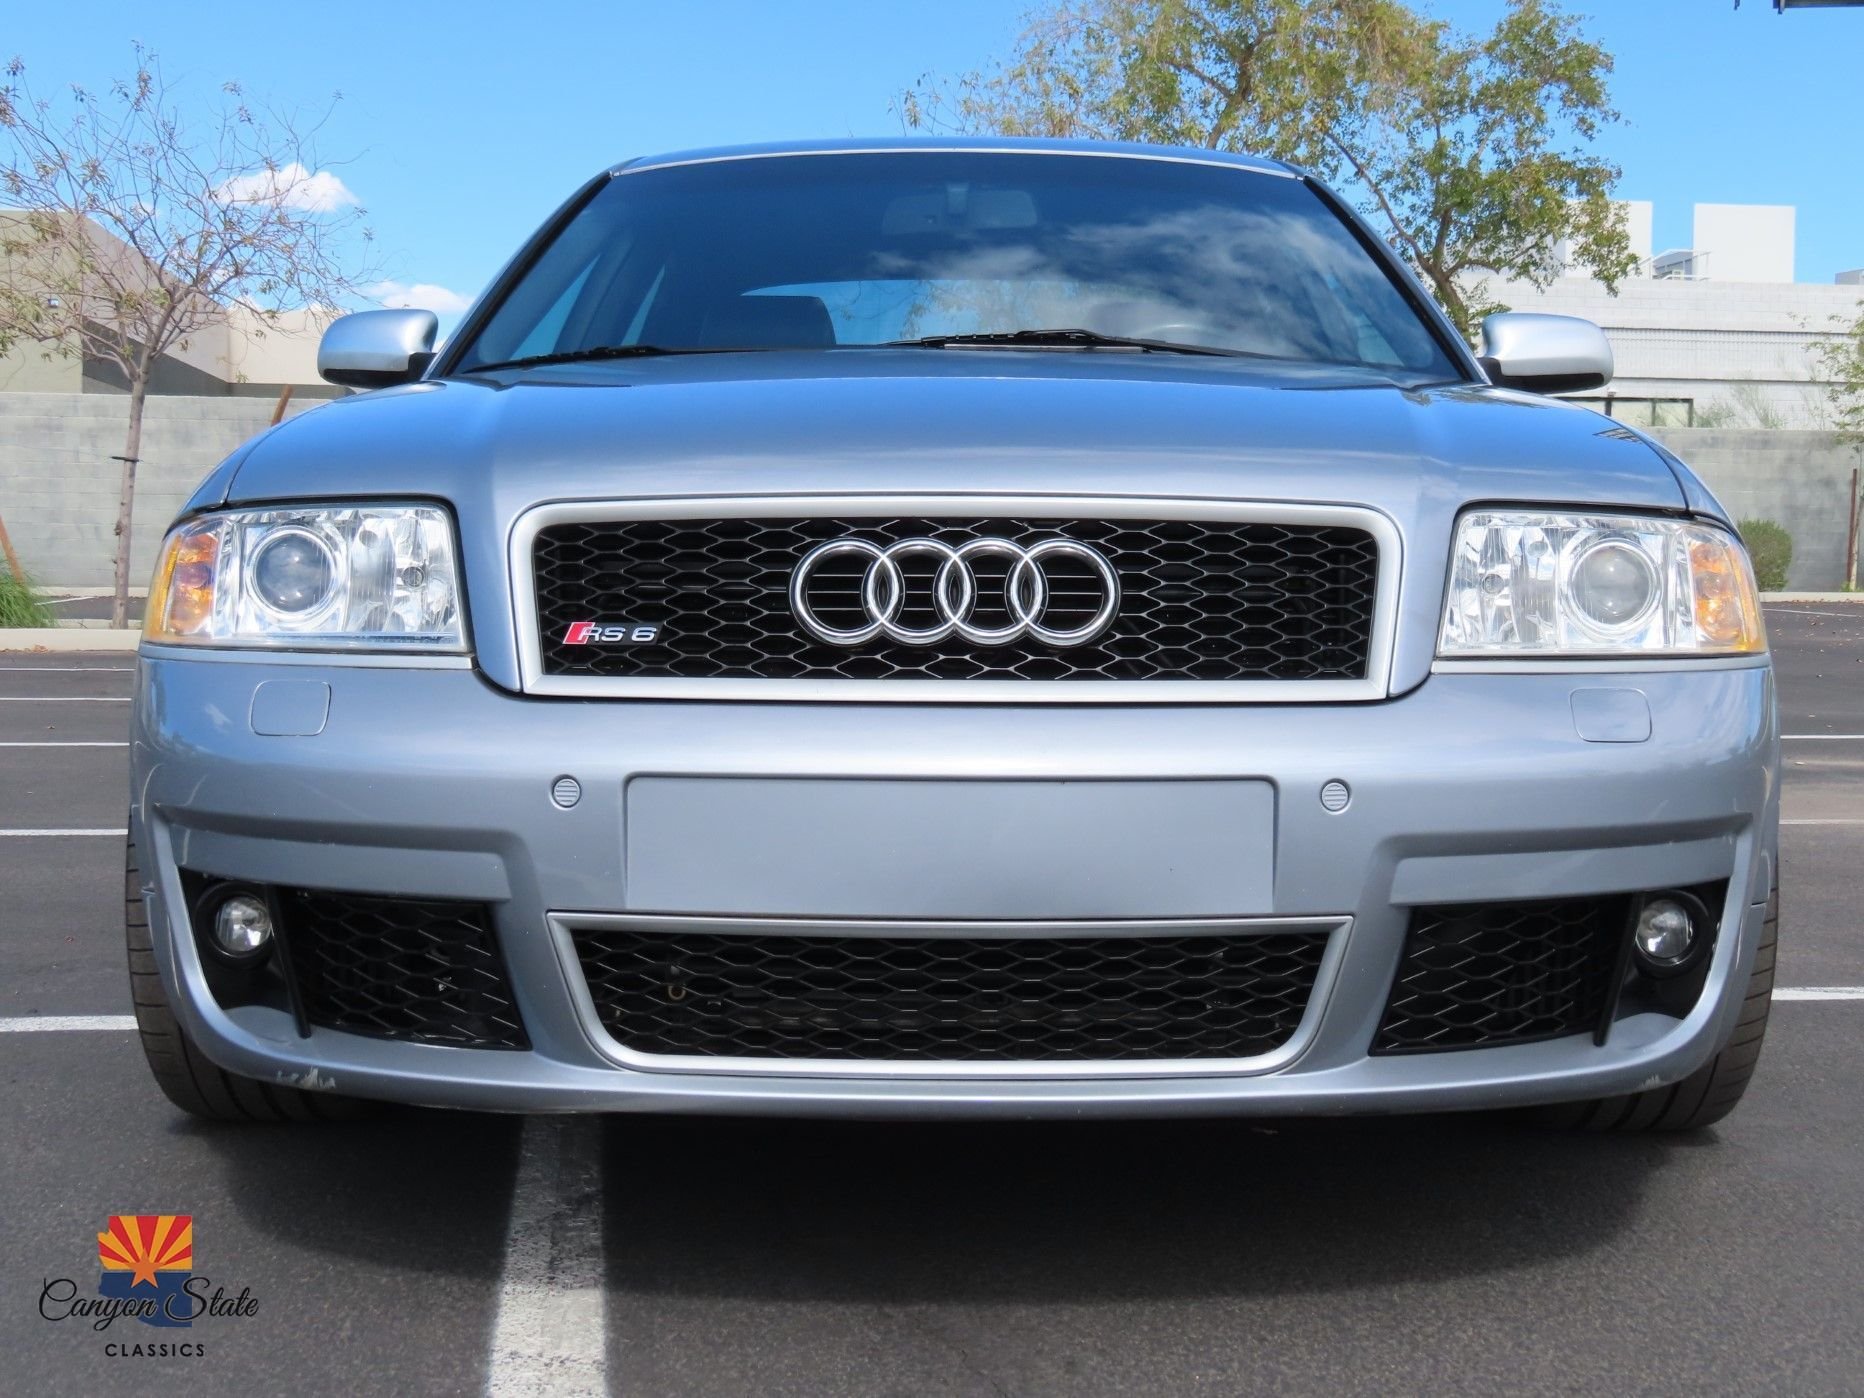 2003   Audi RS6 4dr Sdn 4.2L quattro AWD - Canyon State Classics